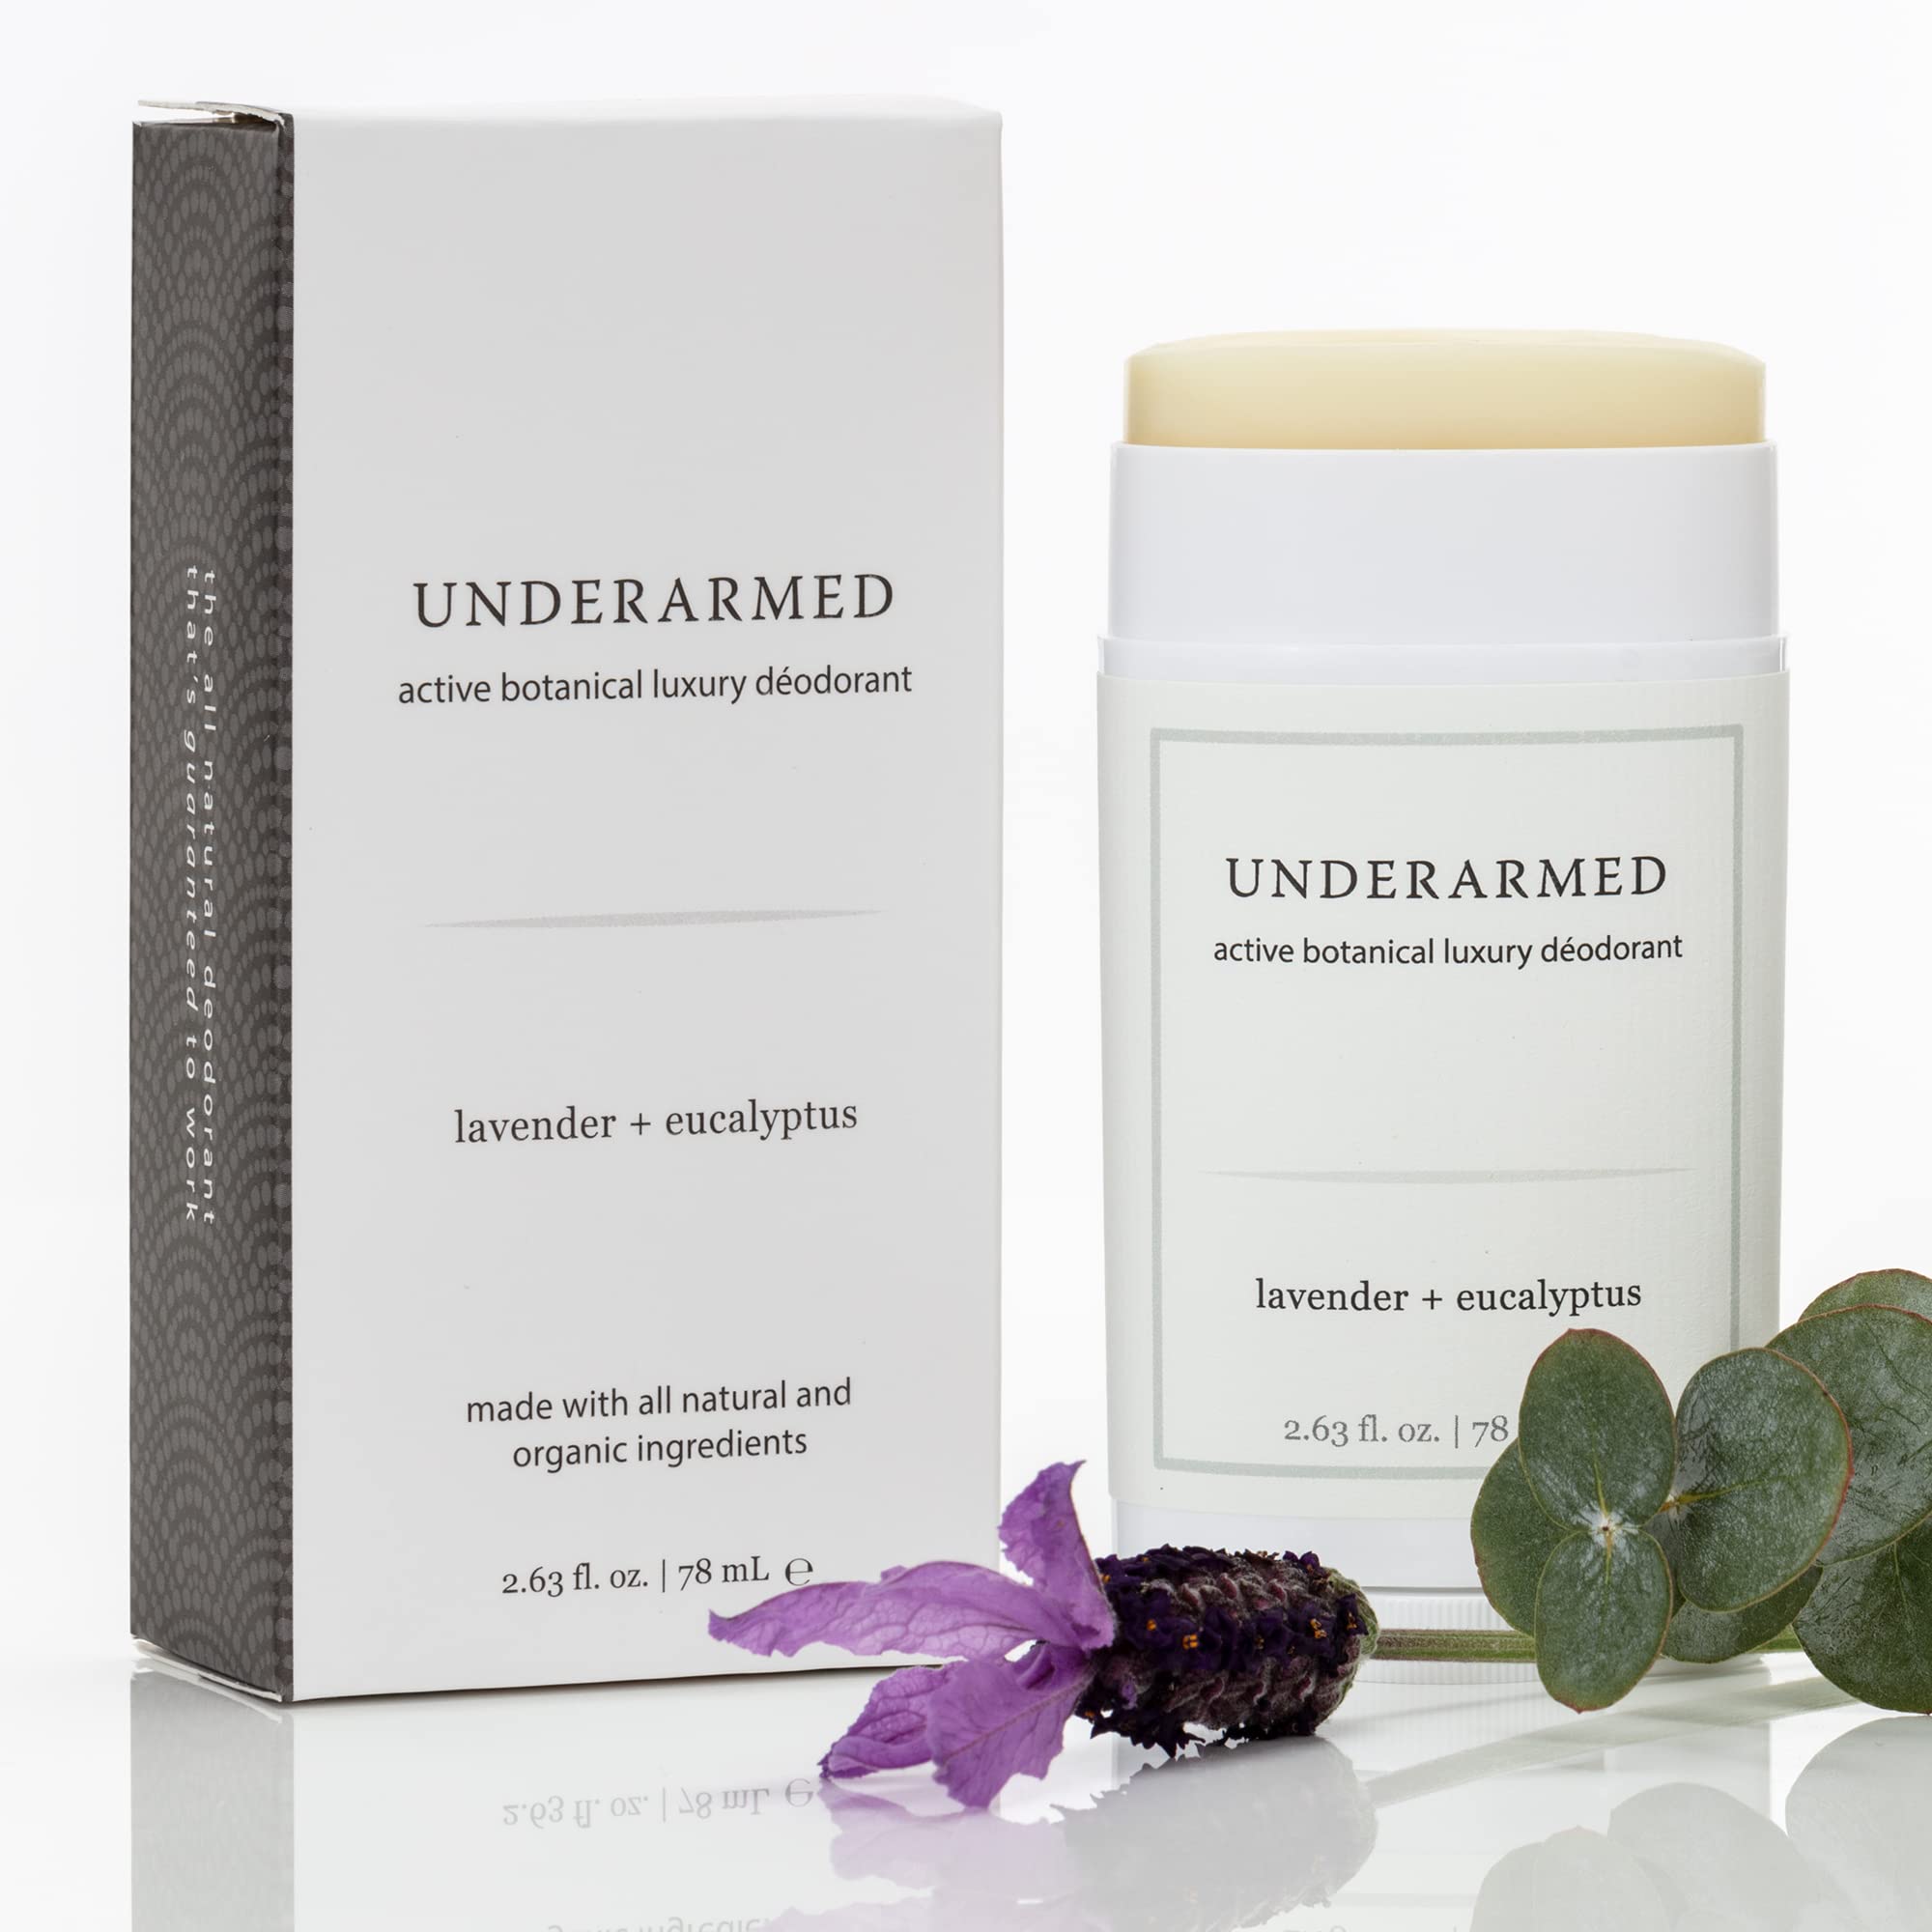 Natural Aluminum-Free Deodorant Stick (That Works) Lavender/Eucalyptus - Stay Fresh All Day - Underarmed for Women & Men - Organic, Healthy, Safe, Non Toxic - Phthalate, Paraben, Gluten & Cruelty Free